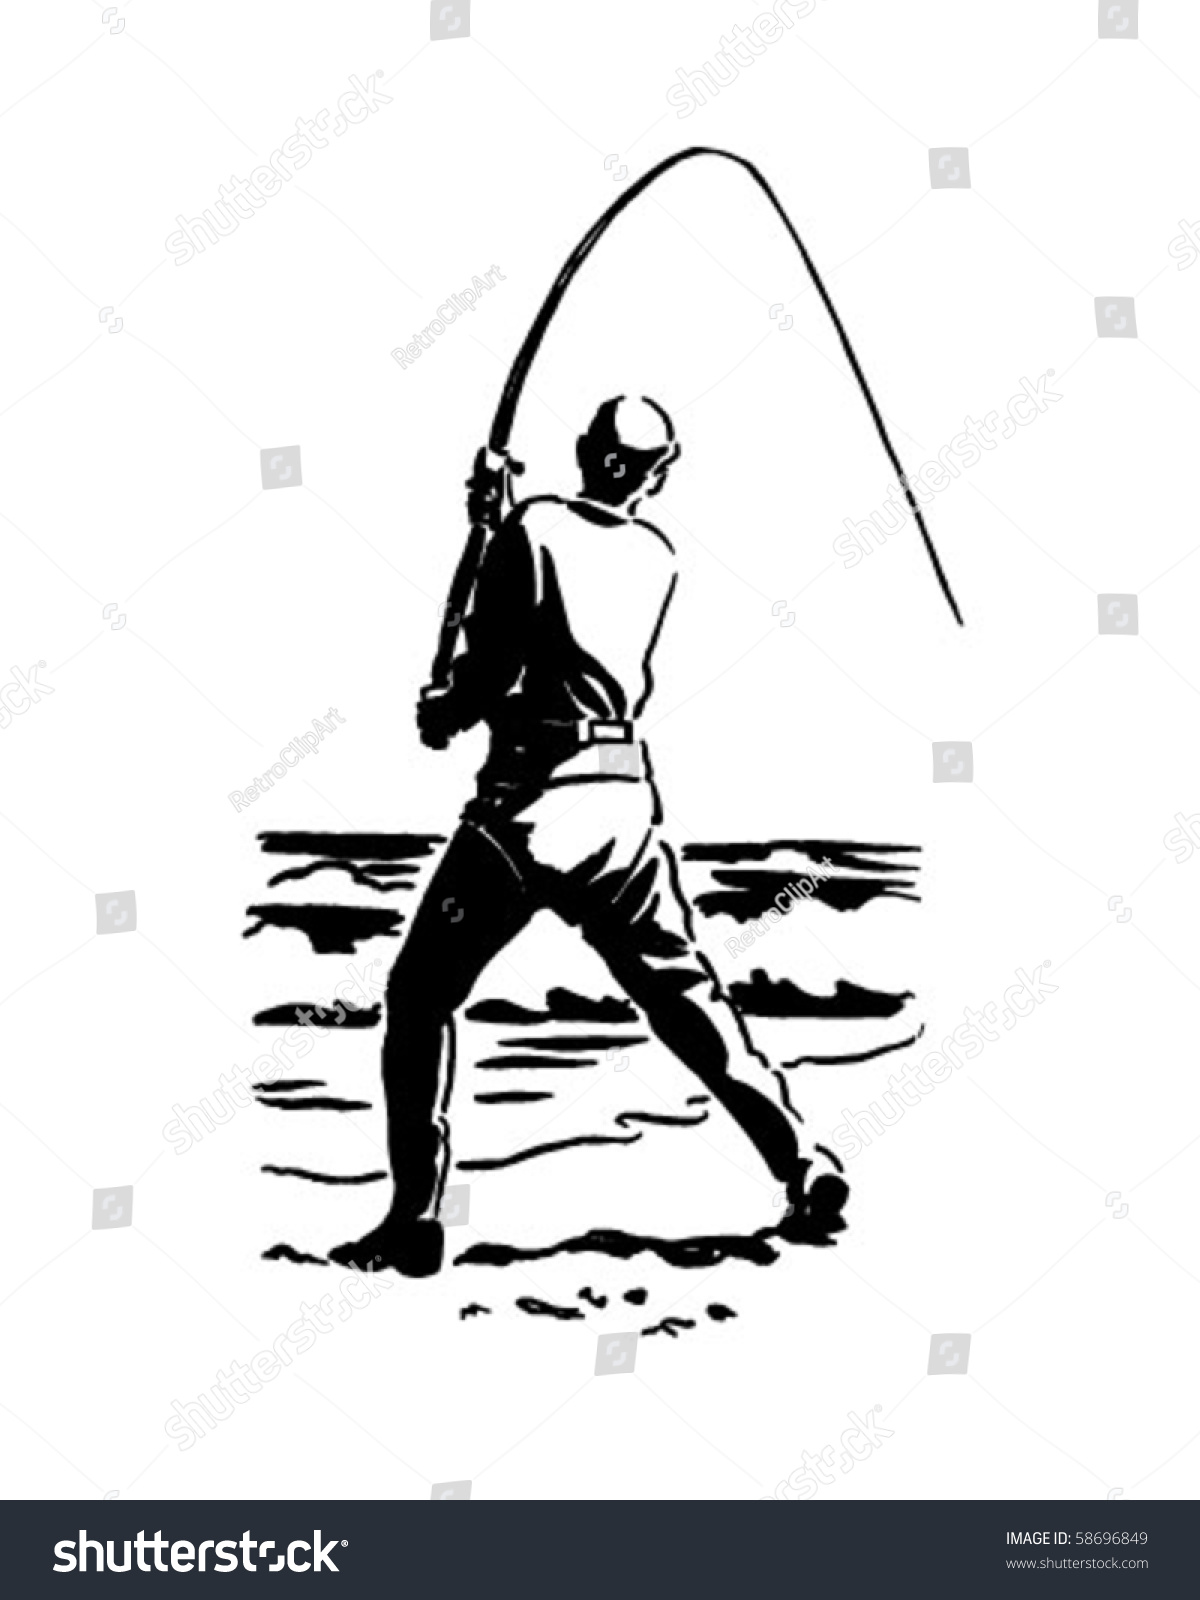 fly fisherman clipart free - photo #44